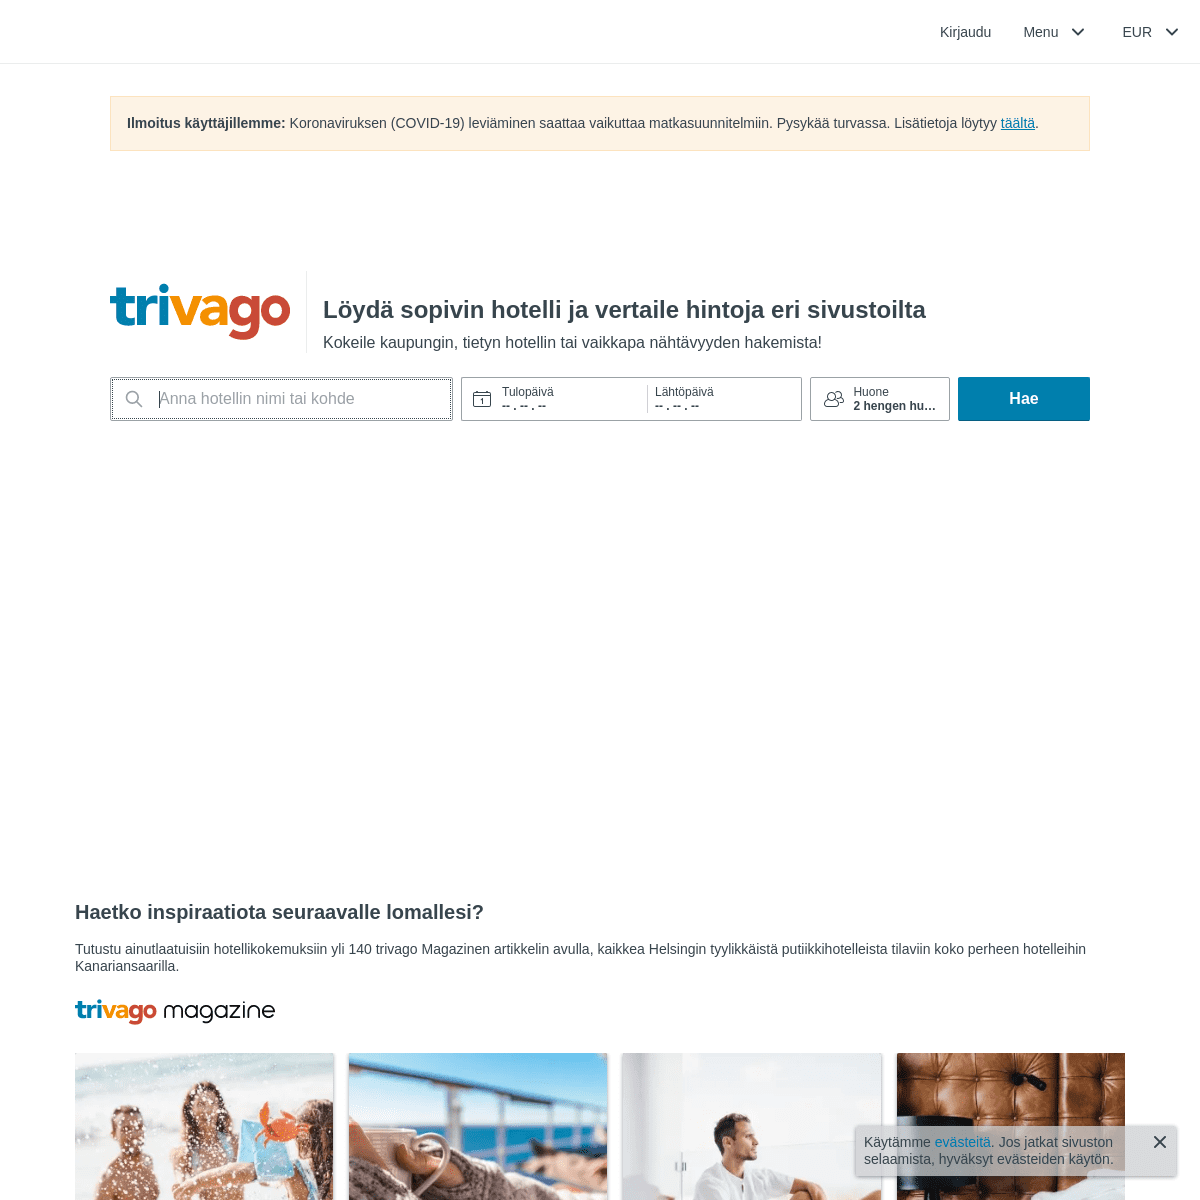 A complete backup of trivago.fi